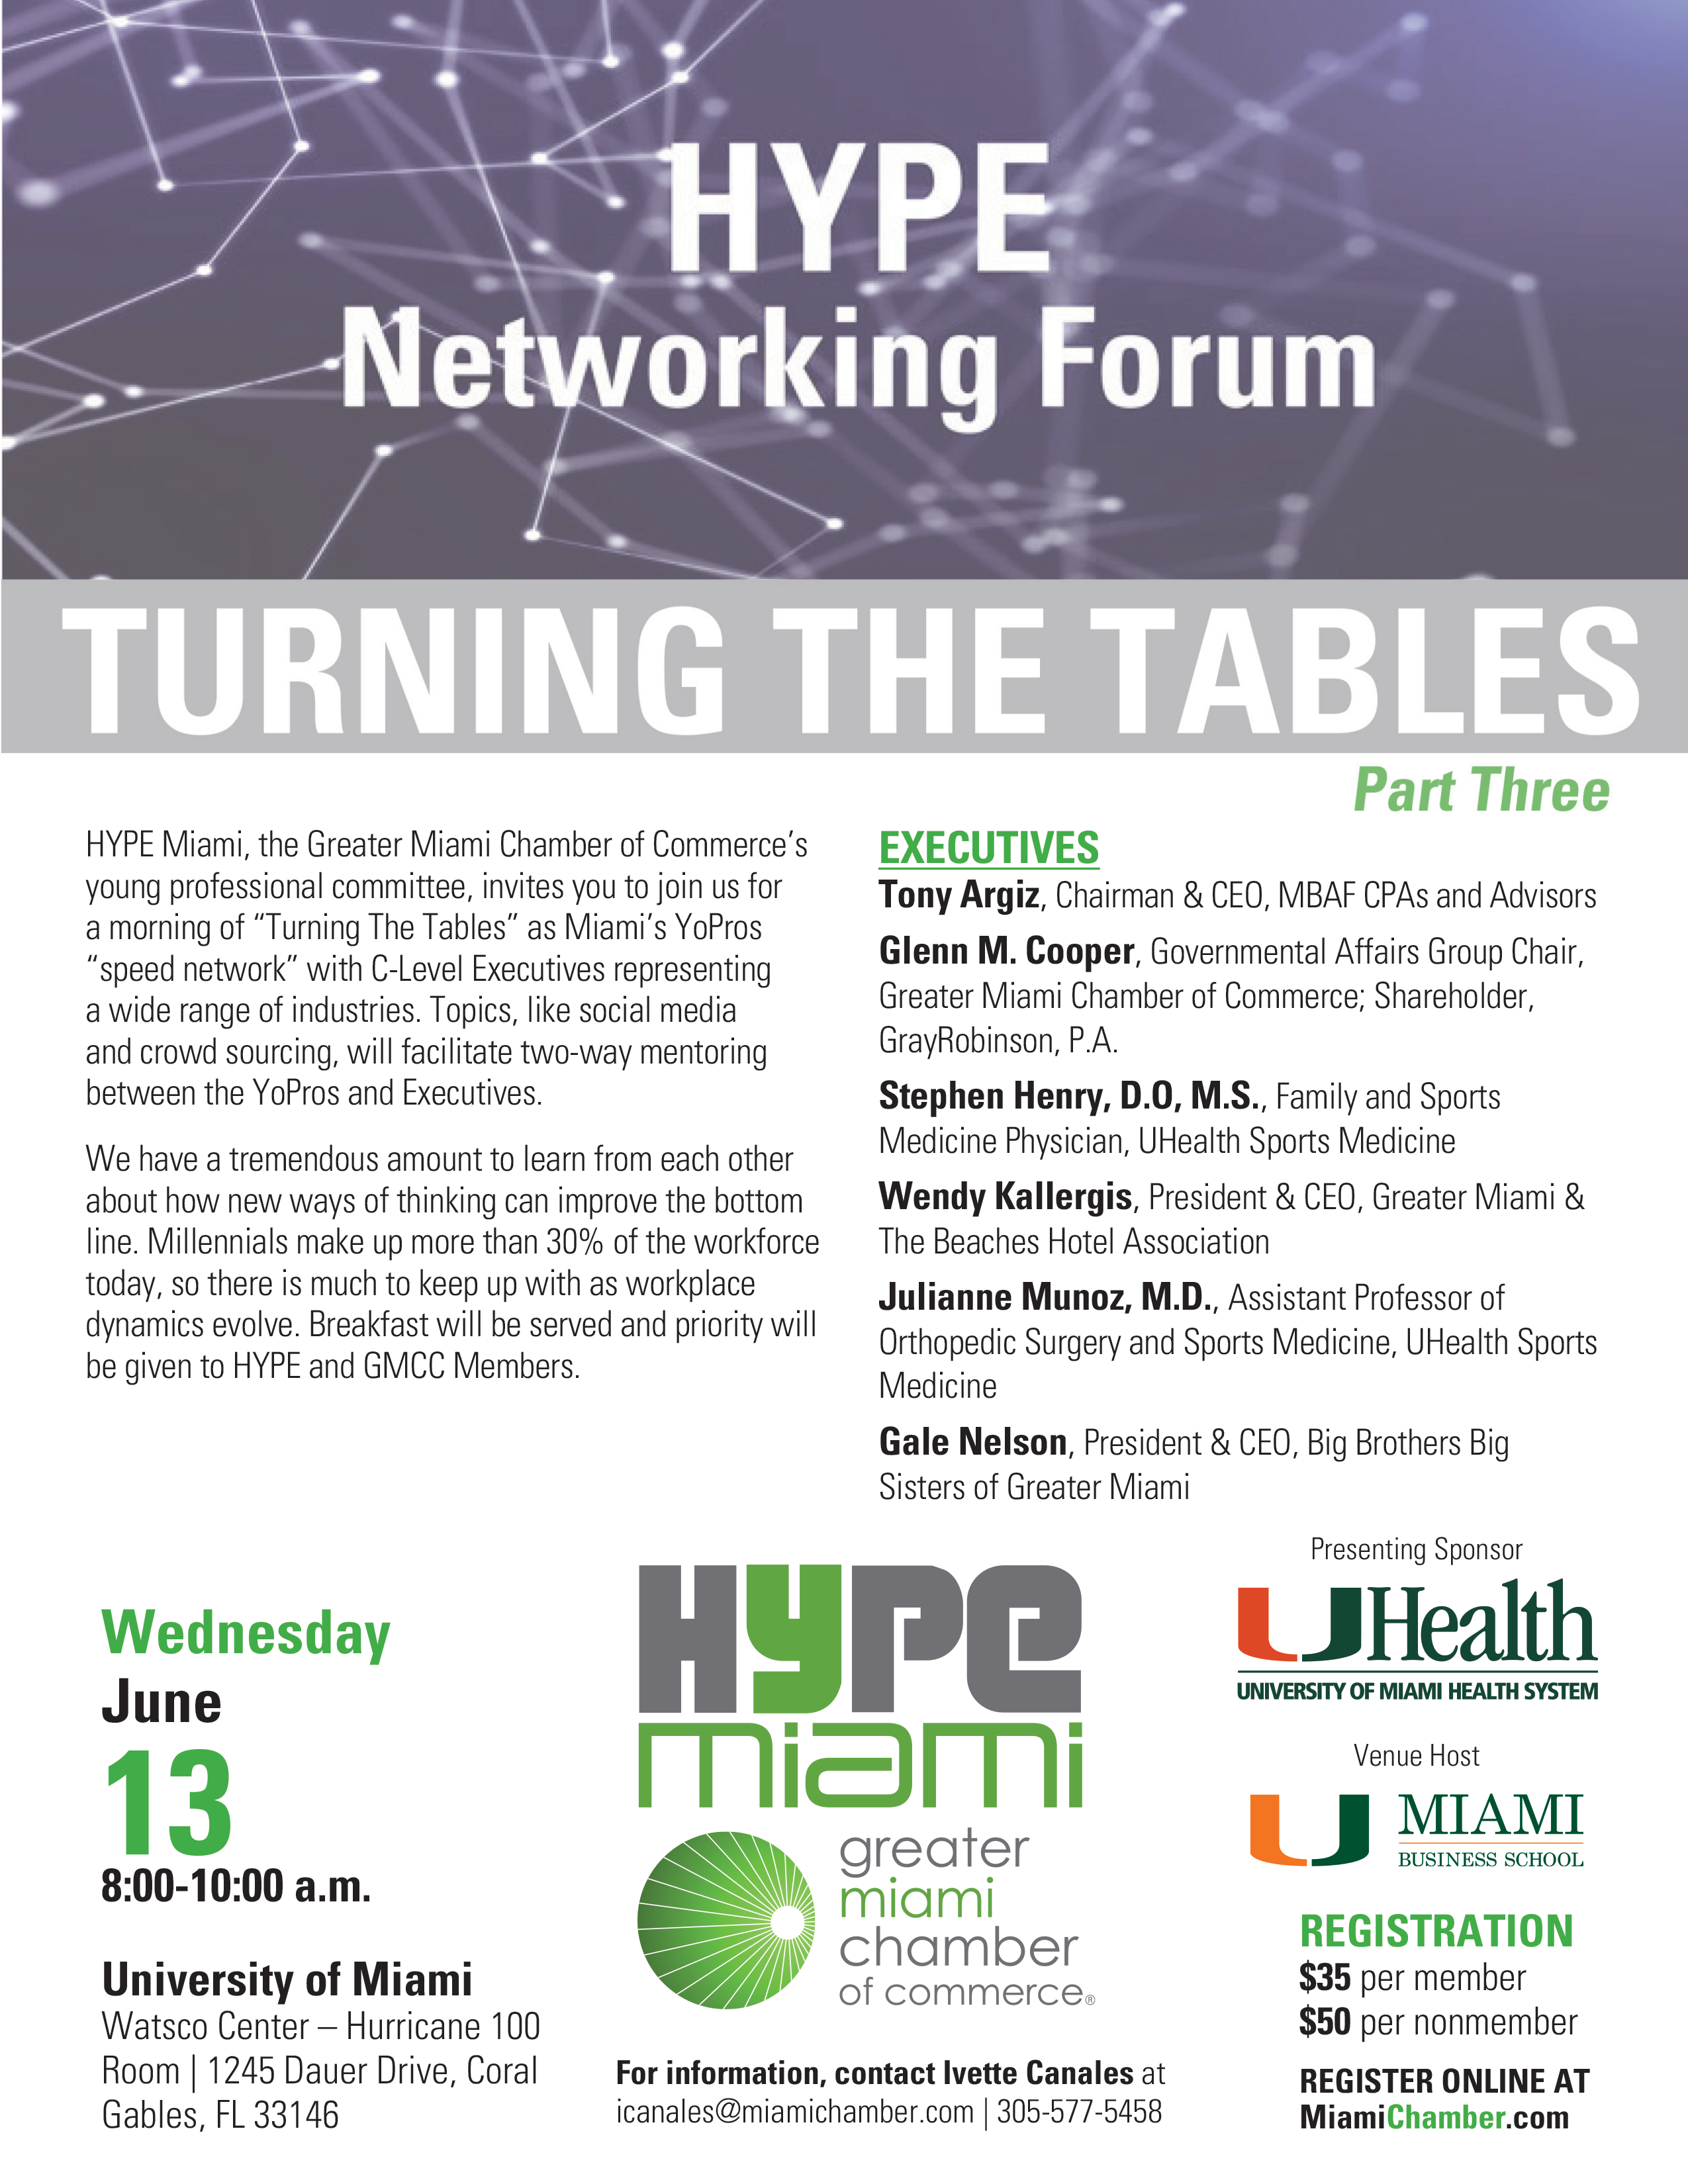 HYPE Miami: Turning The Tables Part 3